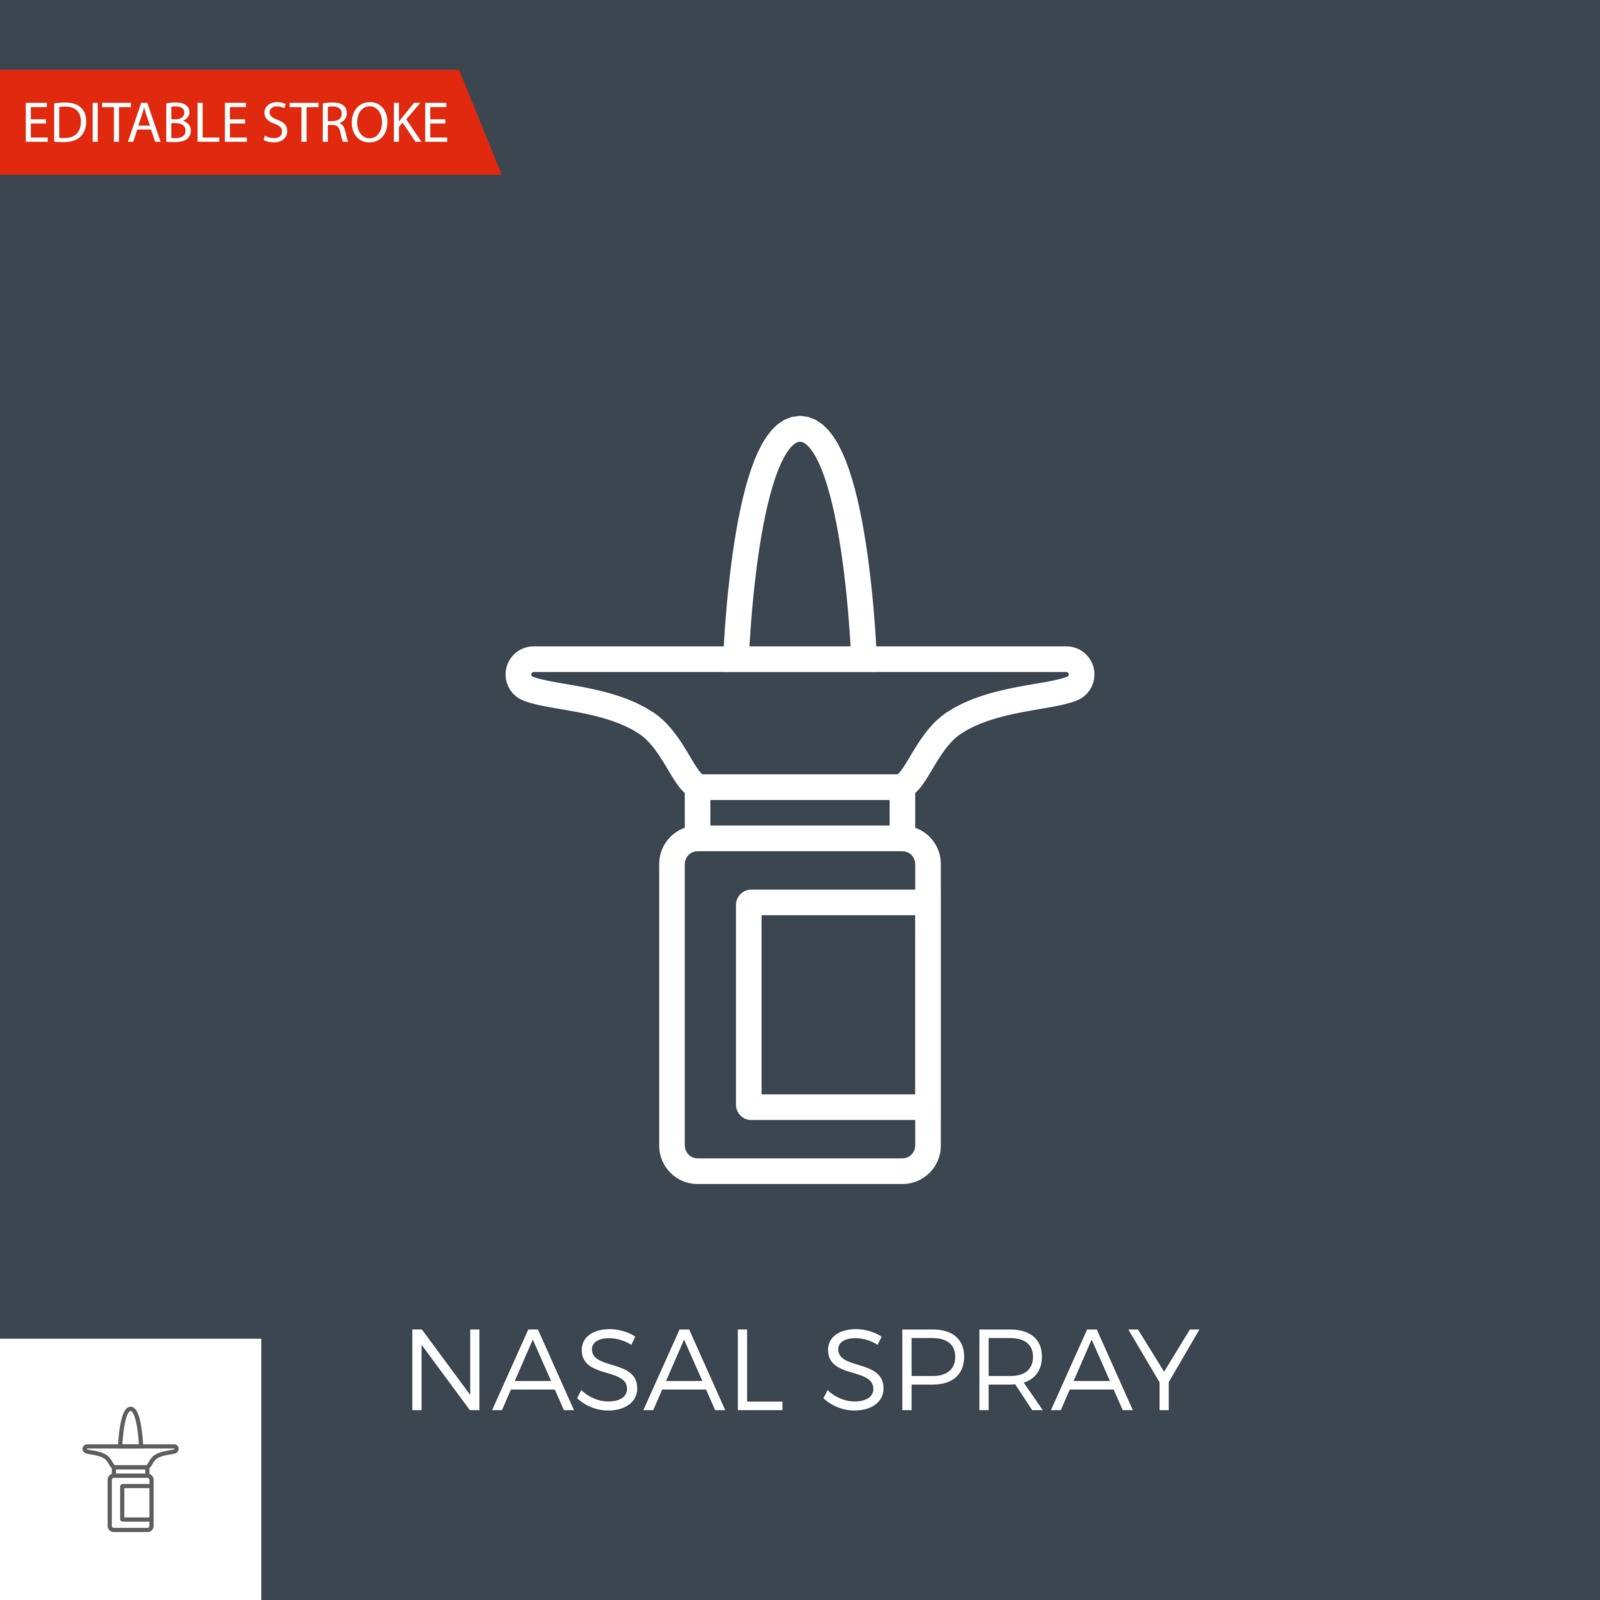 Nasal Spray Thin Line Vector Icon. Flat Icon Isolated on the Black Background. Editable Stroke EPS file. Vector illustration.